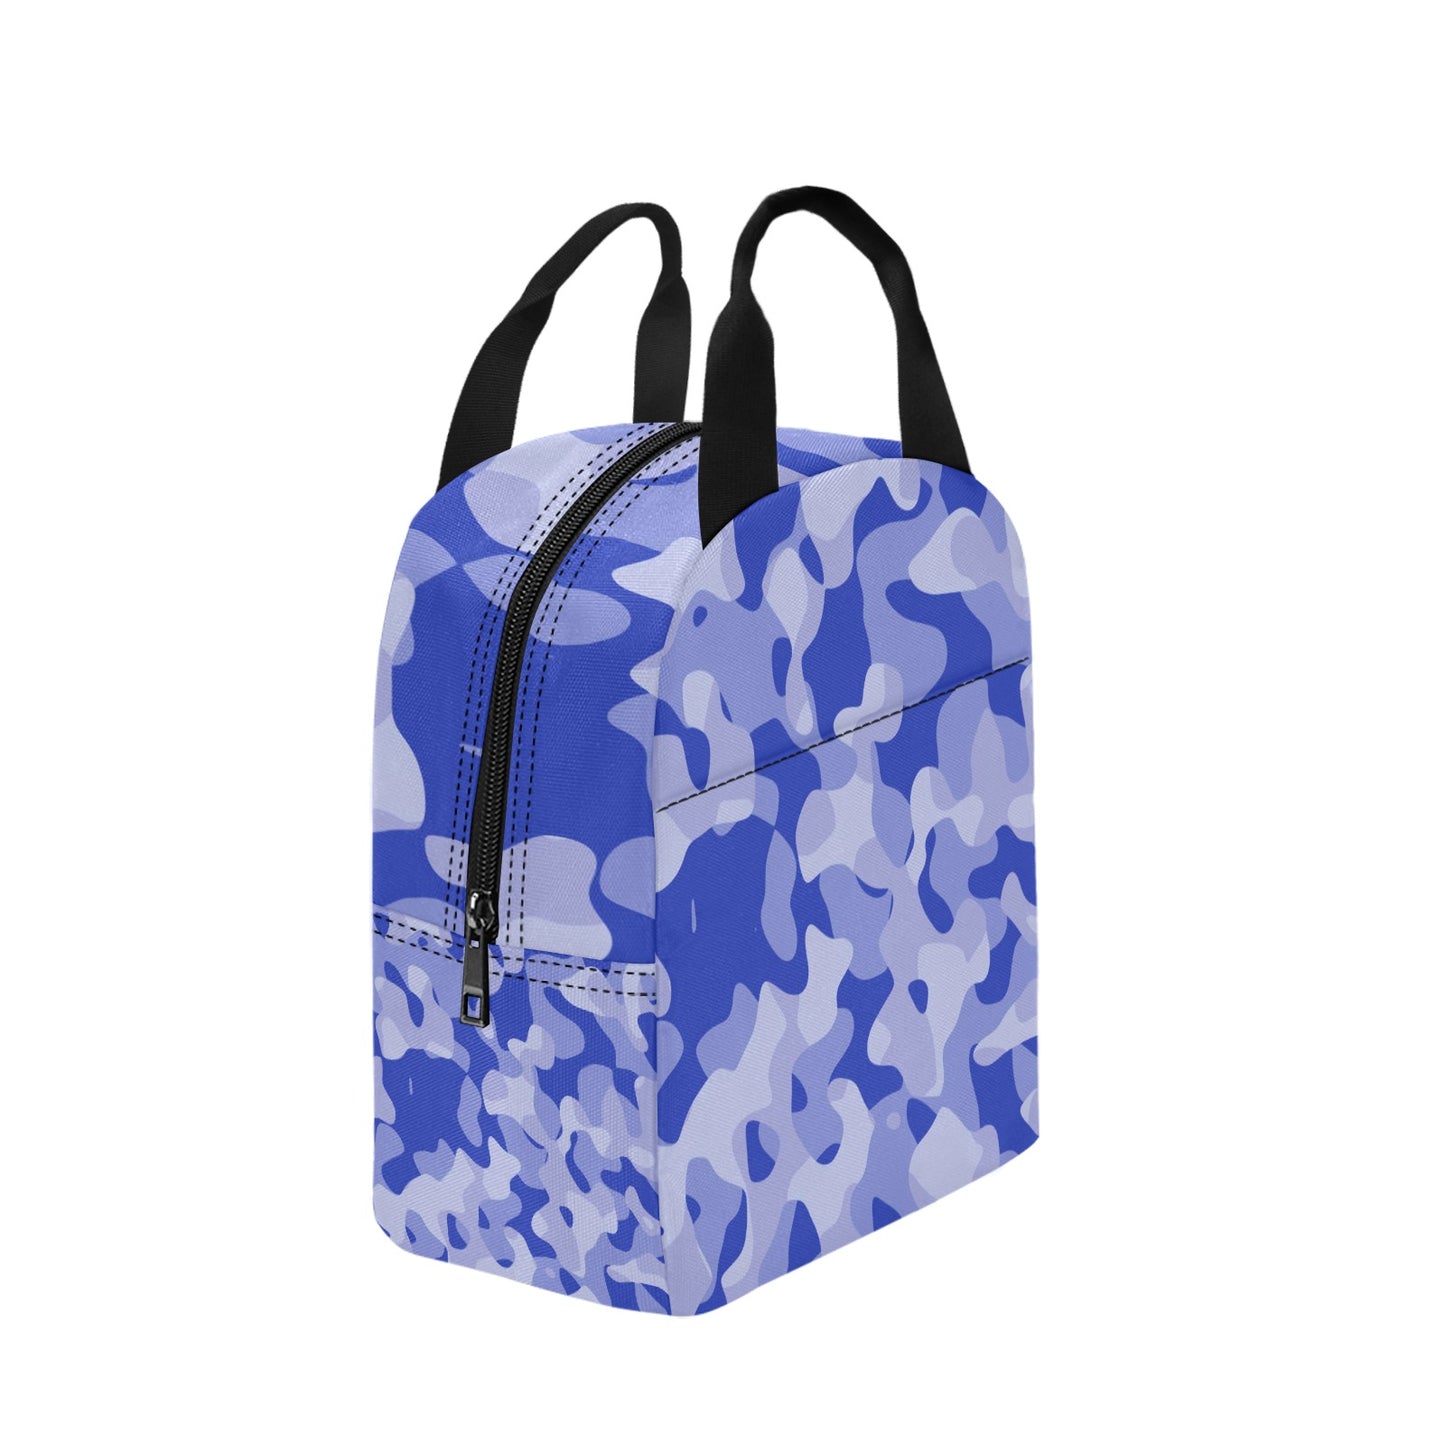 Insulated Zipper Lunch Bag-Blue Camouflage